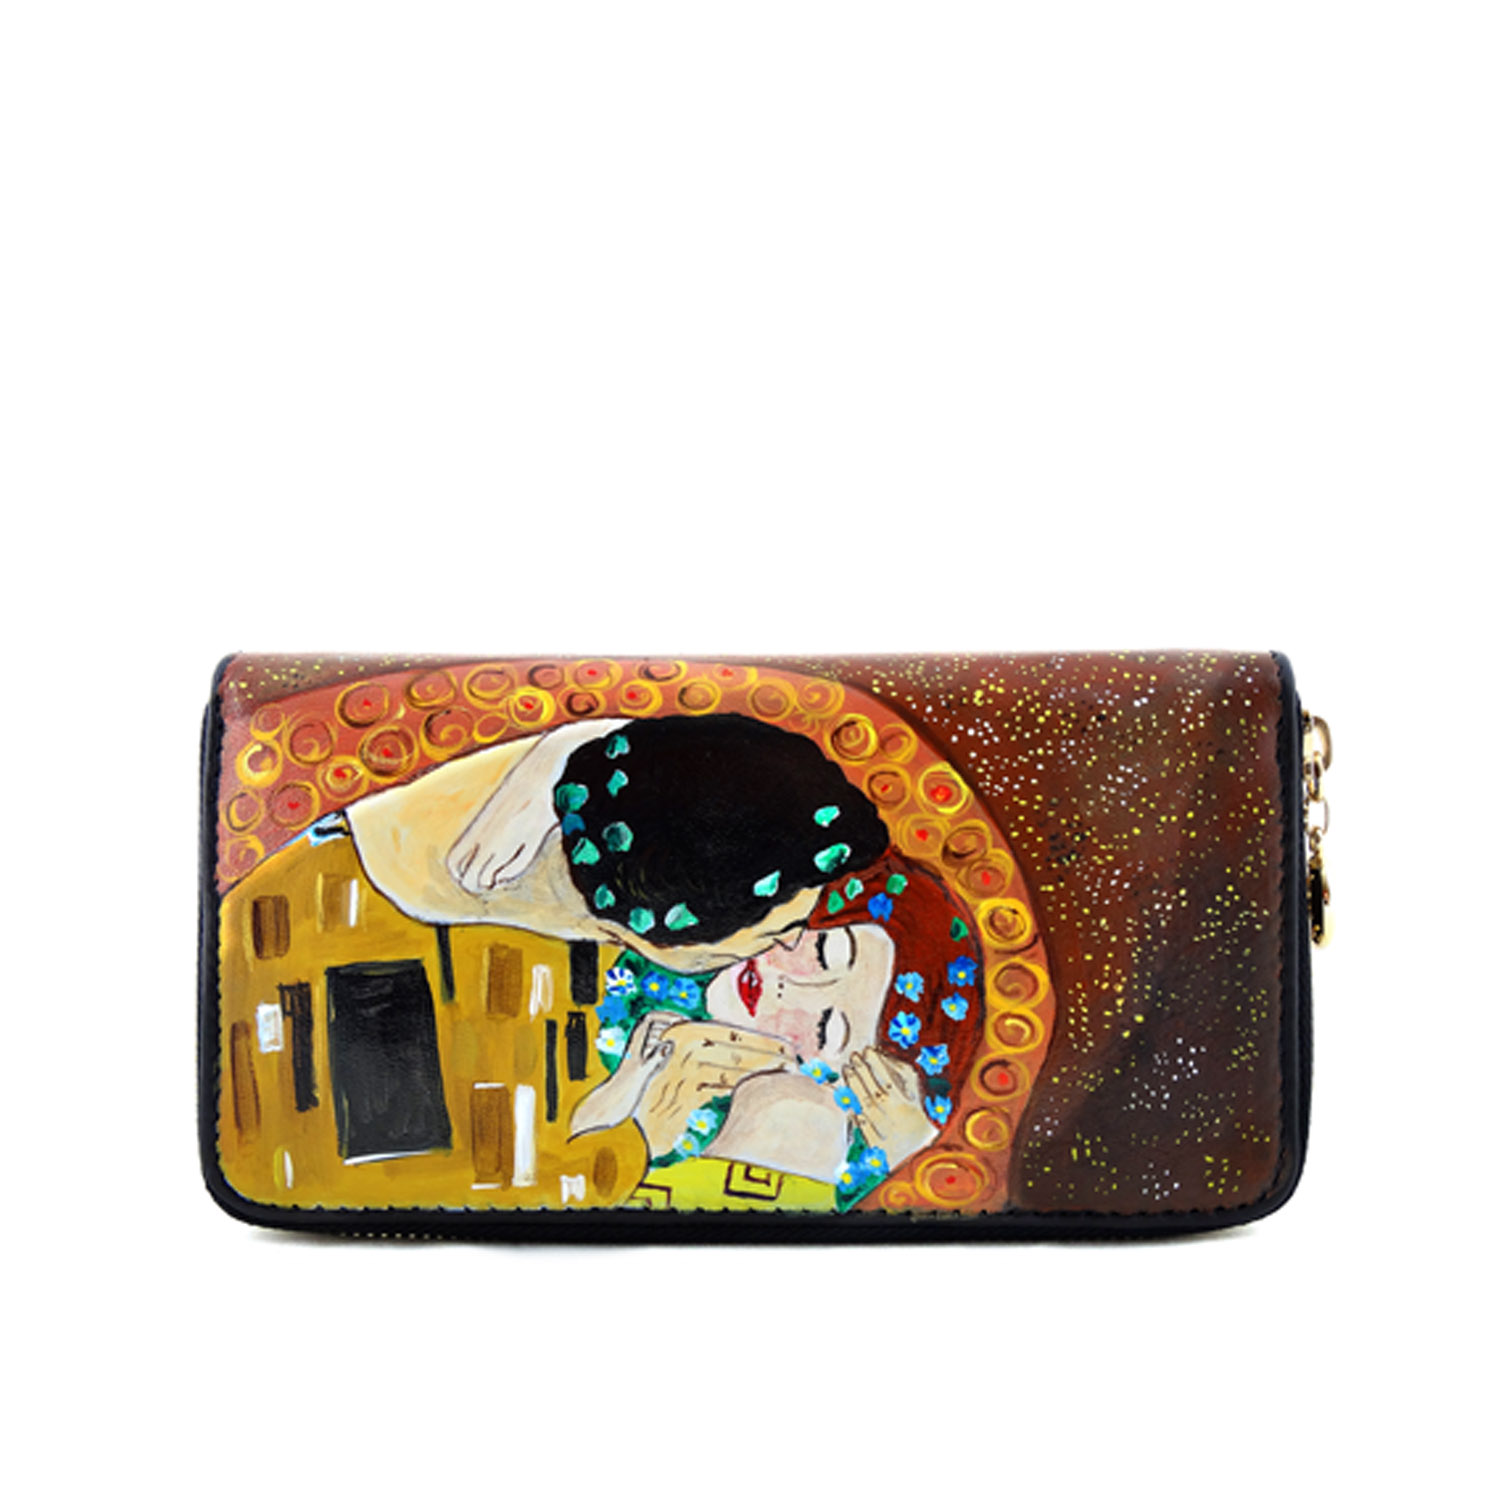 Handpainted wallet - The Kiss by Klimt